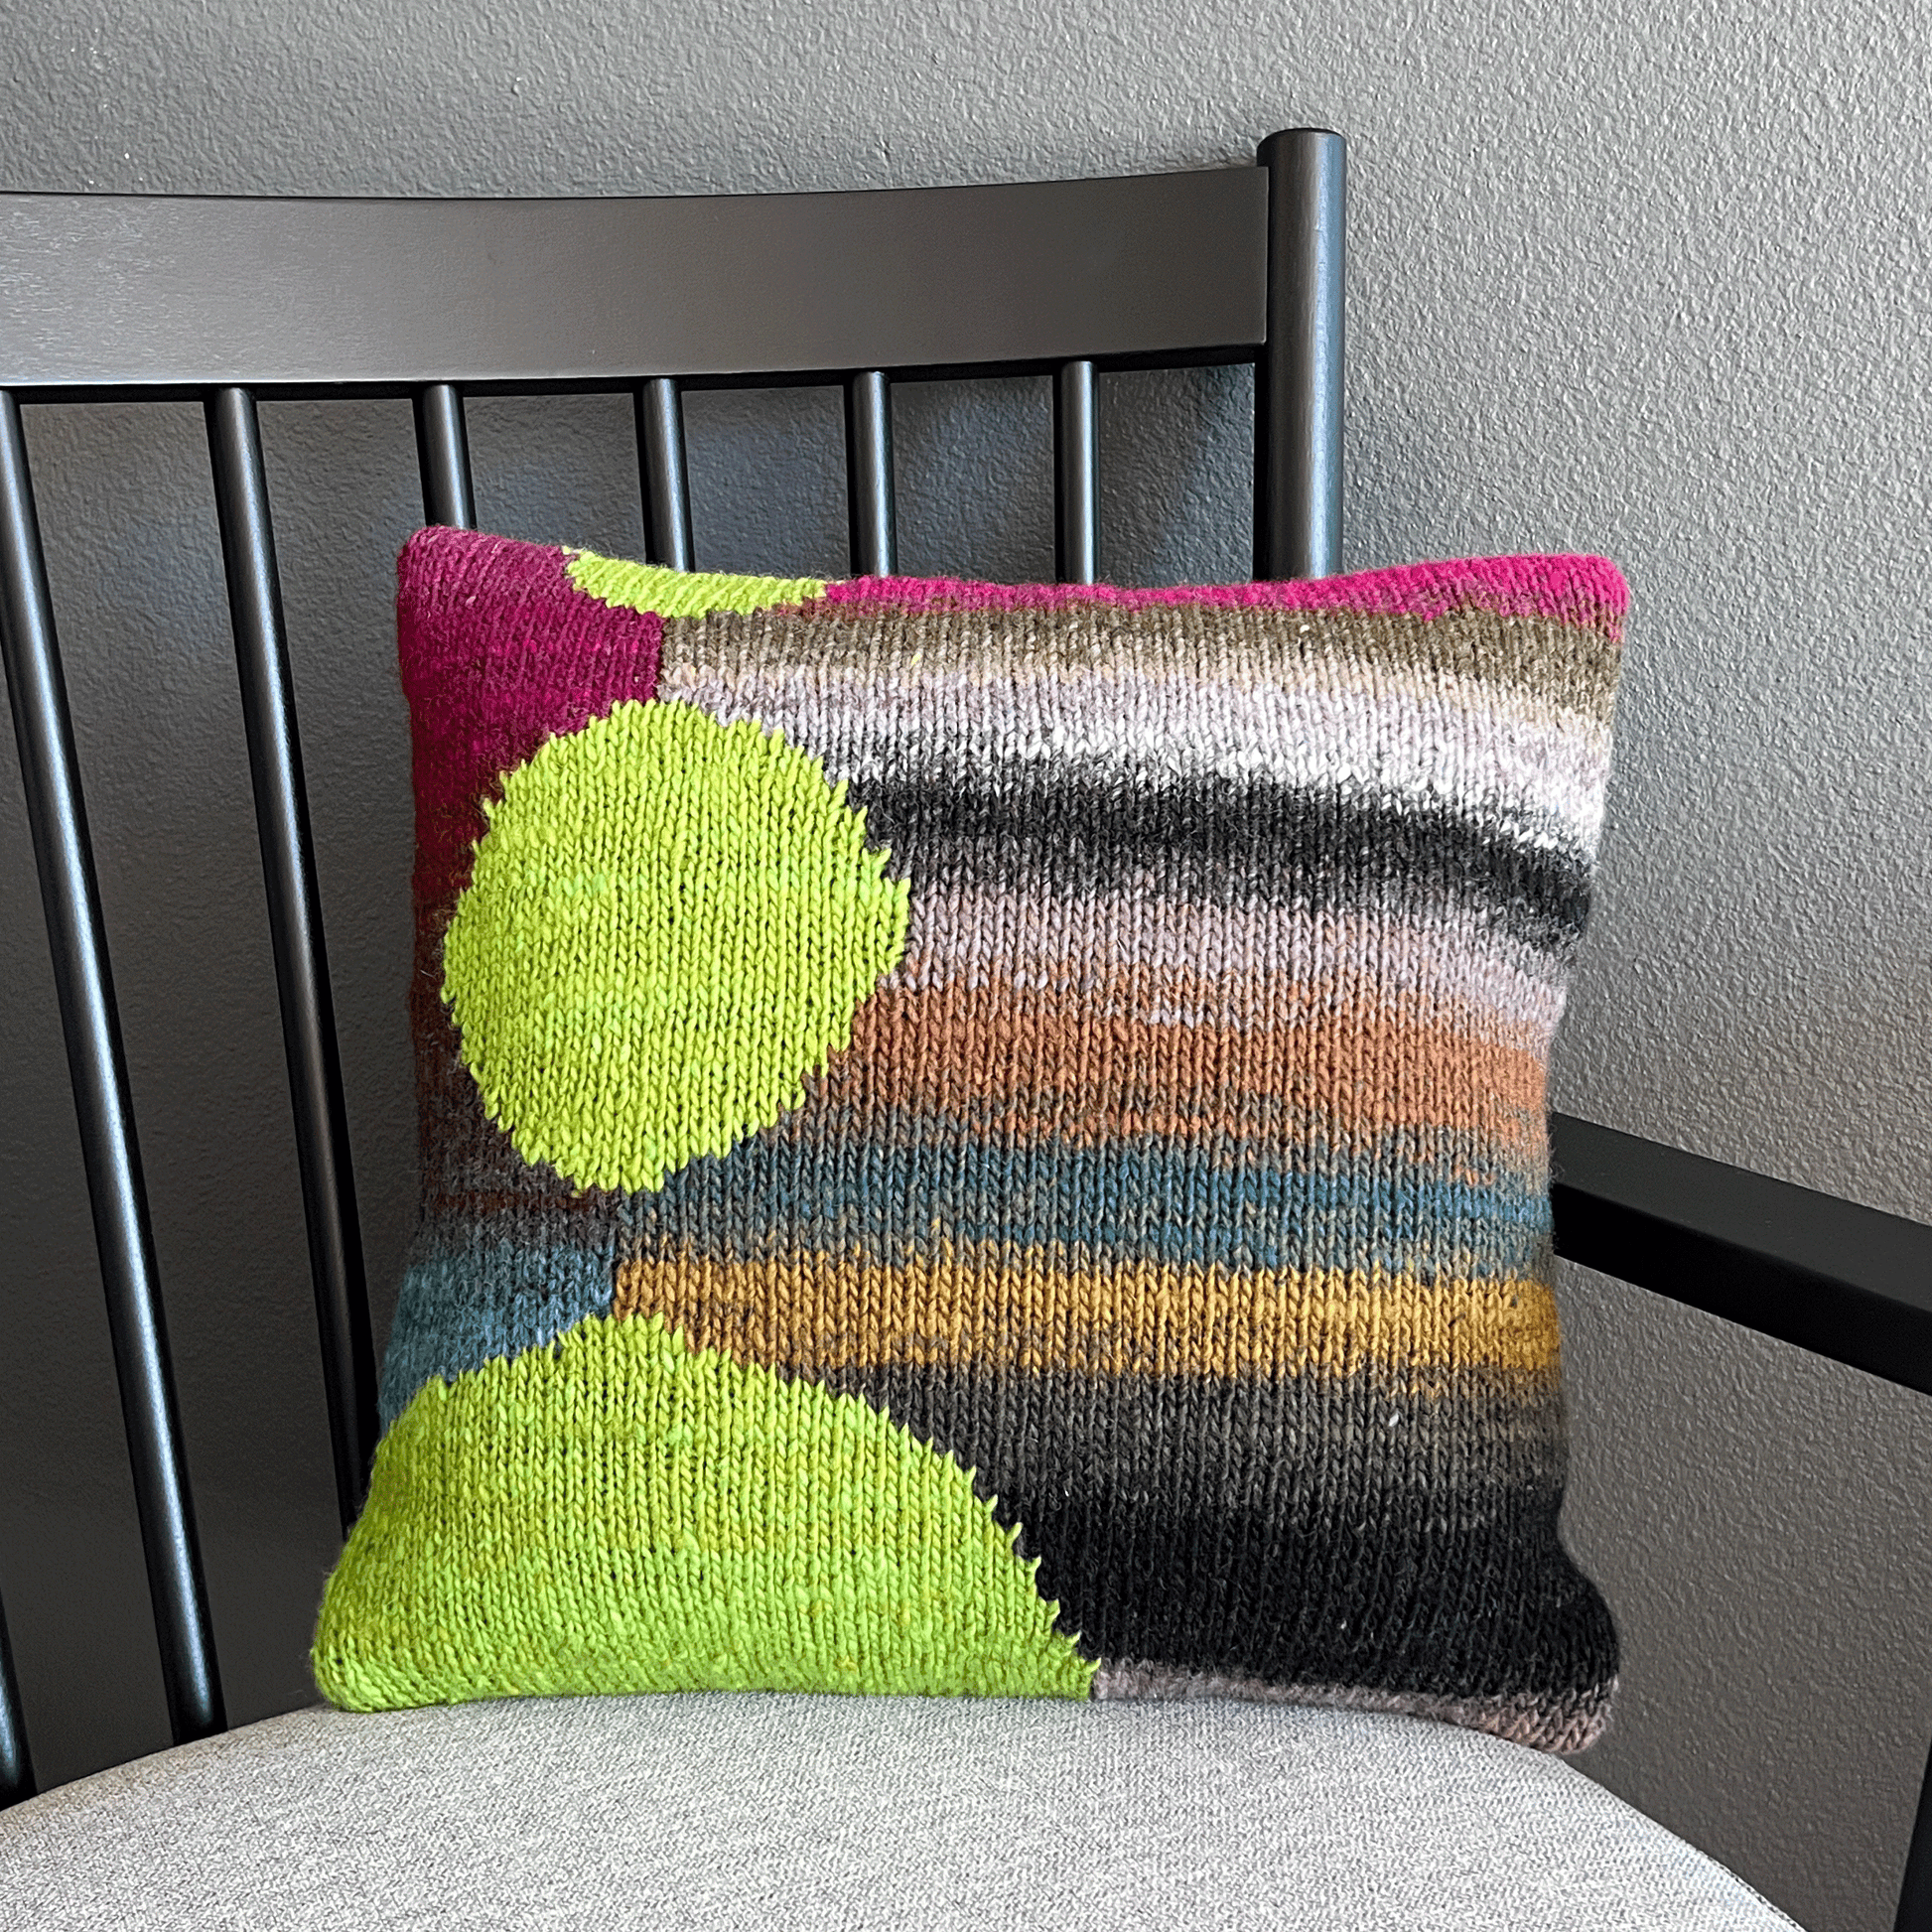 Gracing a black, shaker-style chair against a dark wall, this intarsia pillow's bright lime spheres really "pop" against its background of variegated stripes in rich earthy hues.